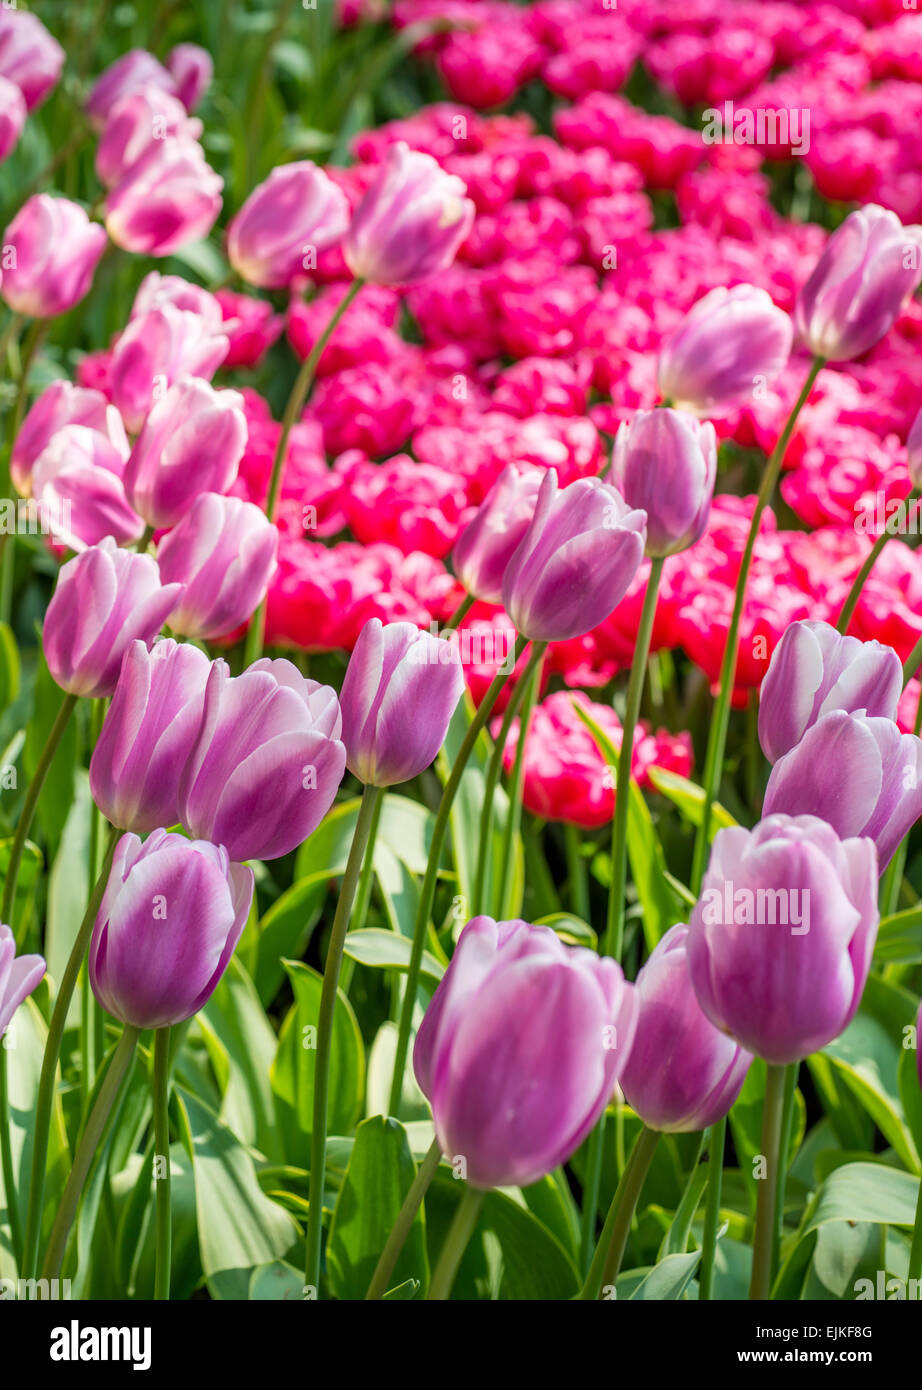 Flower bed with magenta pink and purple tulips (Tulipa) in spring time Stock Photo